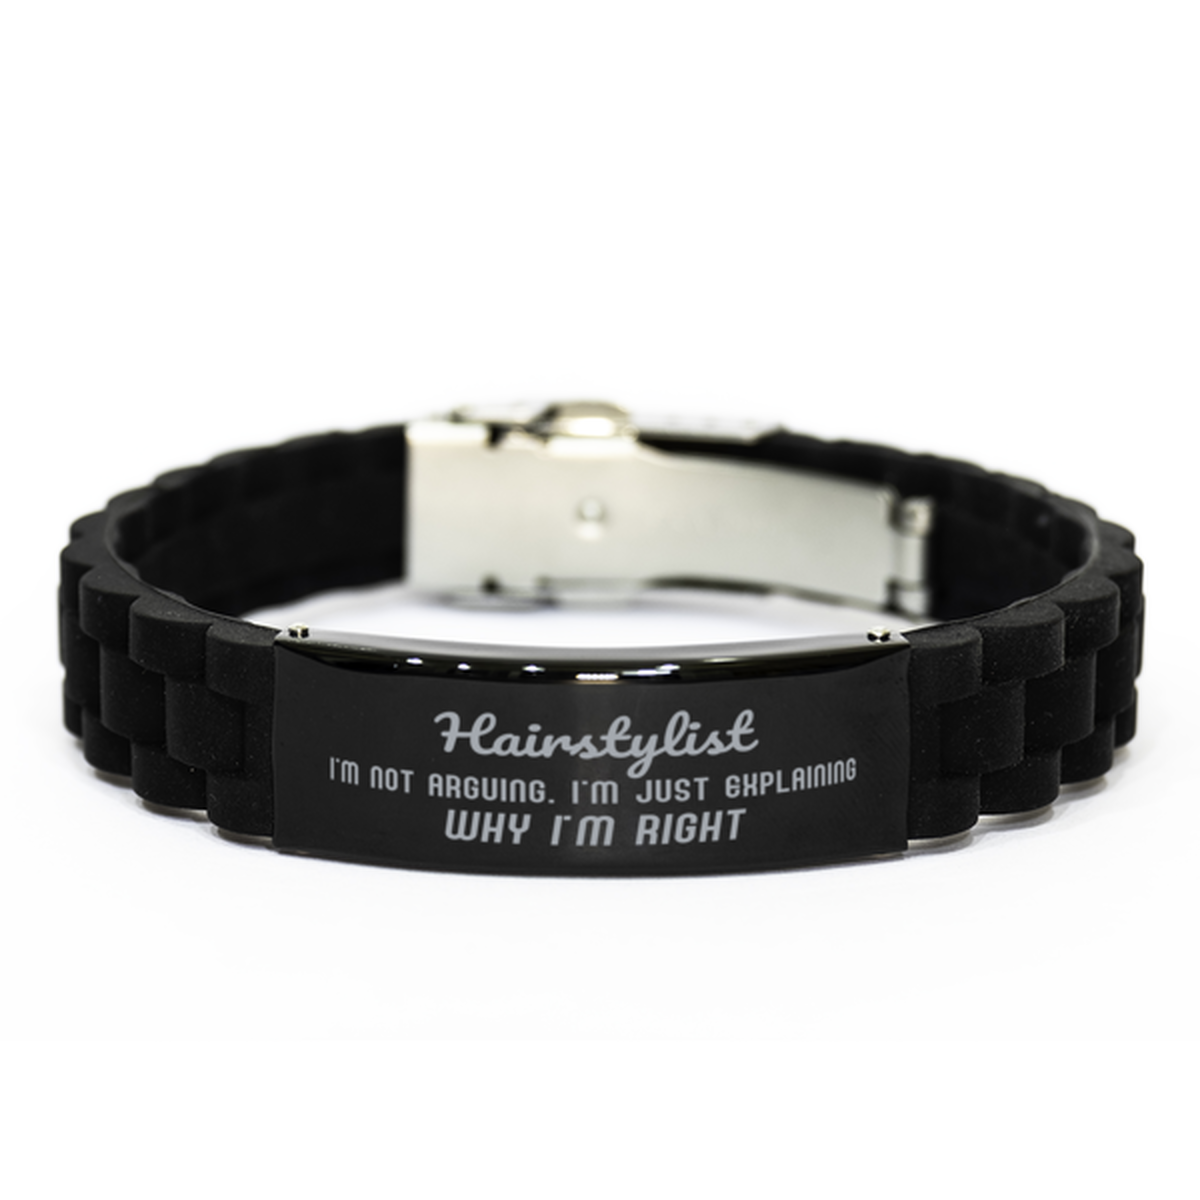 Hairstylist I'm not Arguing. I'm Just Explaining Why I'm RIGHT Black Glidelock Clasp Bracelet, Funny Saying Quote Hairstylist Gifts For Hairstylist Graduation Birthday Christmas Gifts for Men Women Coworker